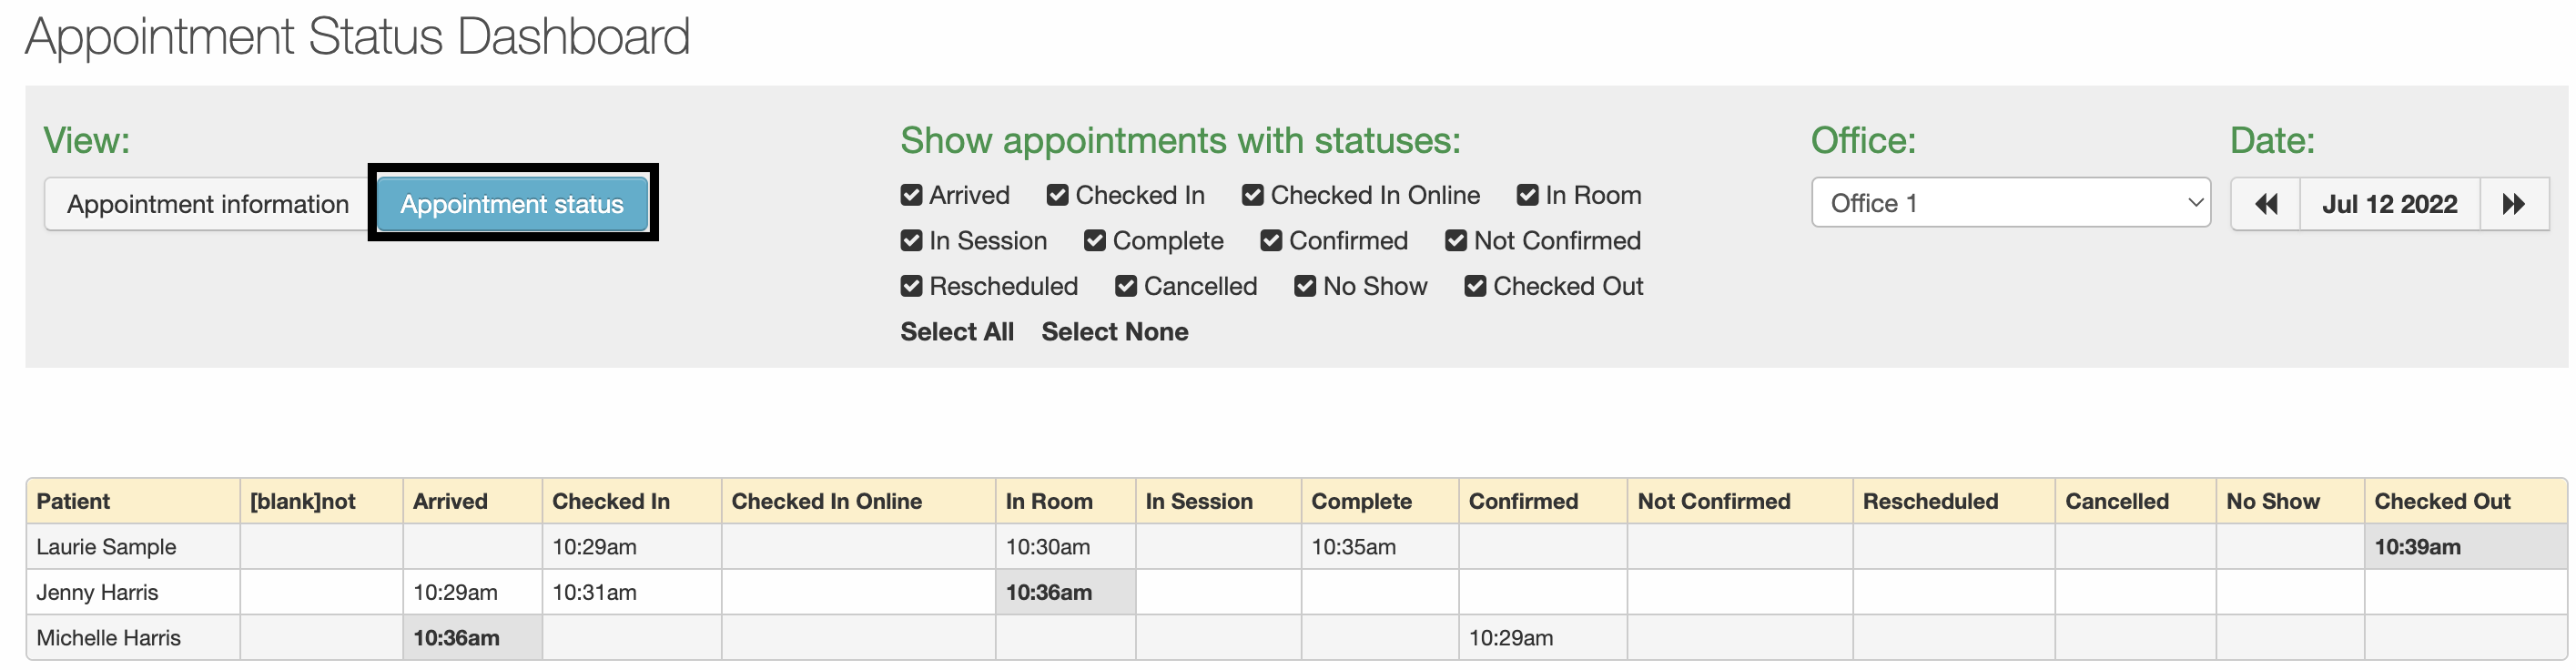 Appointments_Dashboard_Appointment_Status_View.png